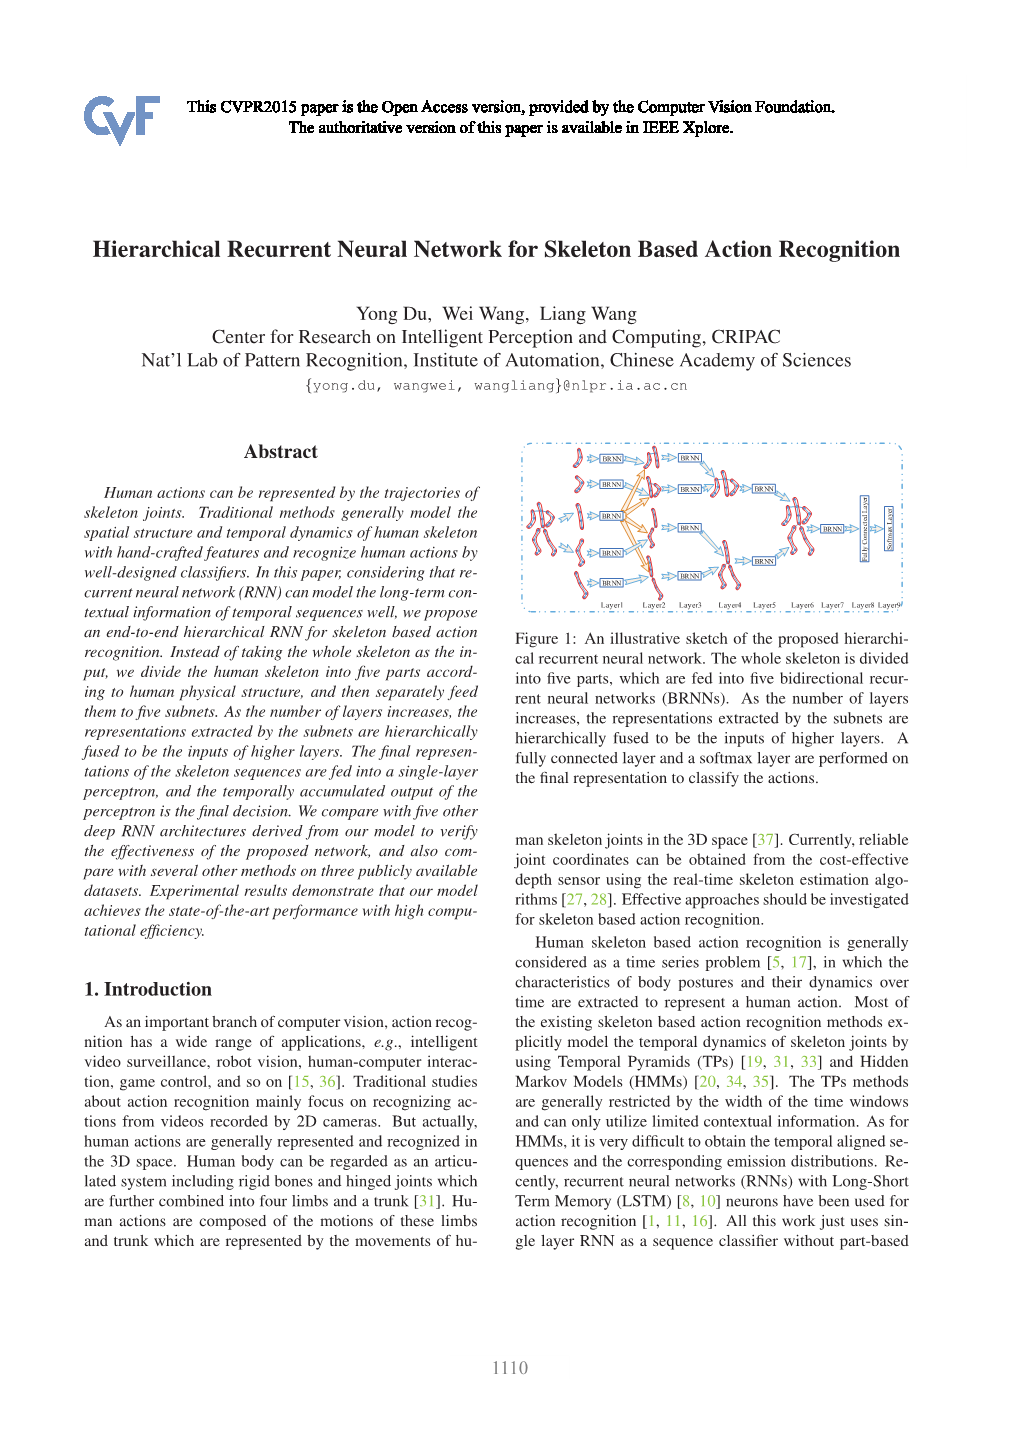 Hierarchical Recurrent Neural Network for Skeleton Based Action Recognition